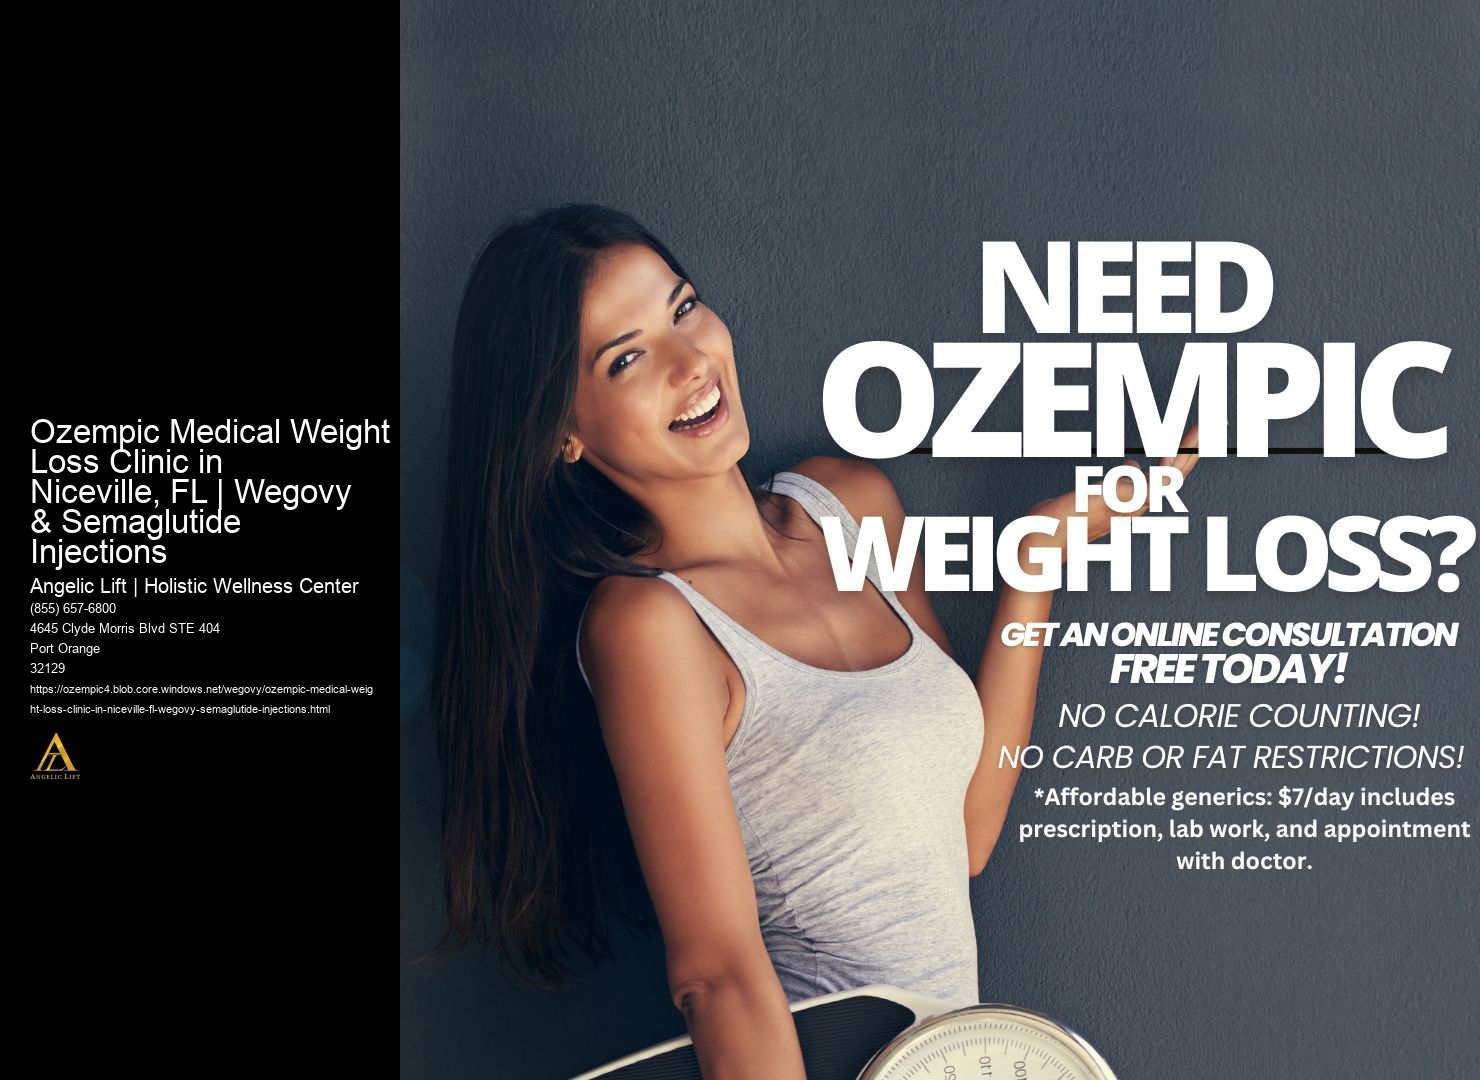 Ozempic Medical Weight Loss Clinic in Niceville, FL | Wegovy & Semaglutide Injections